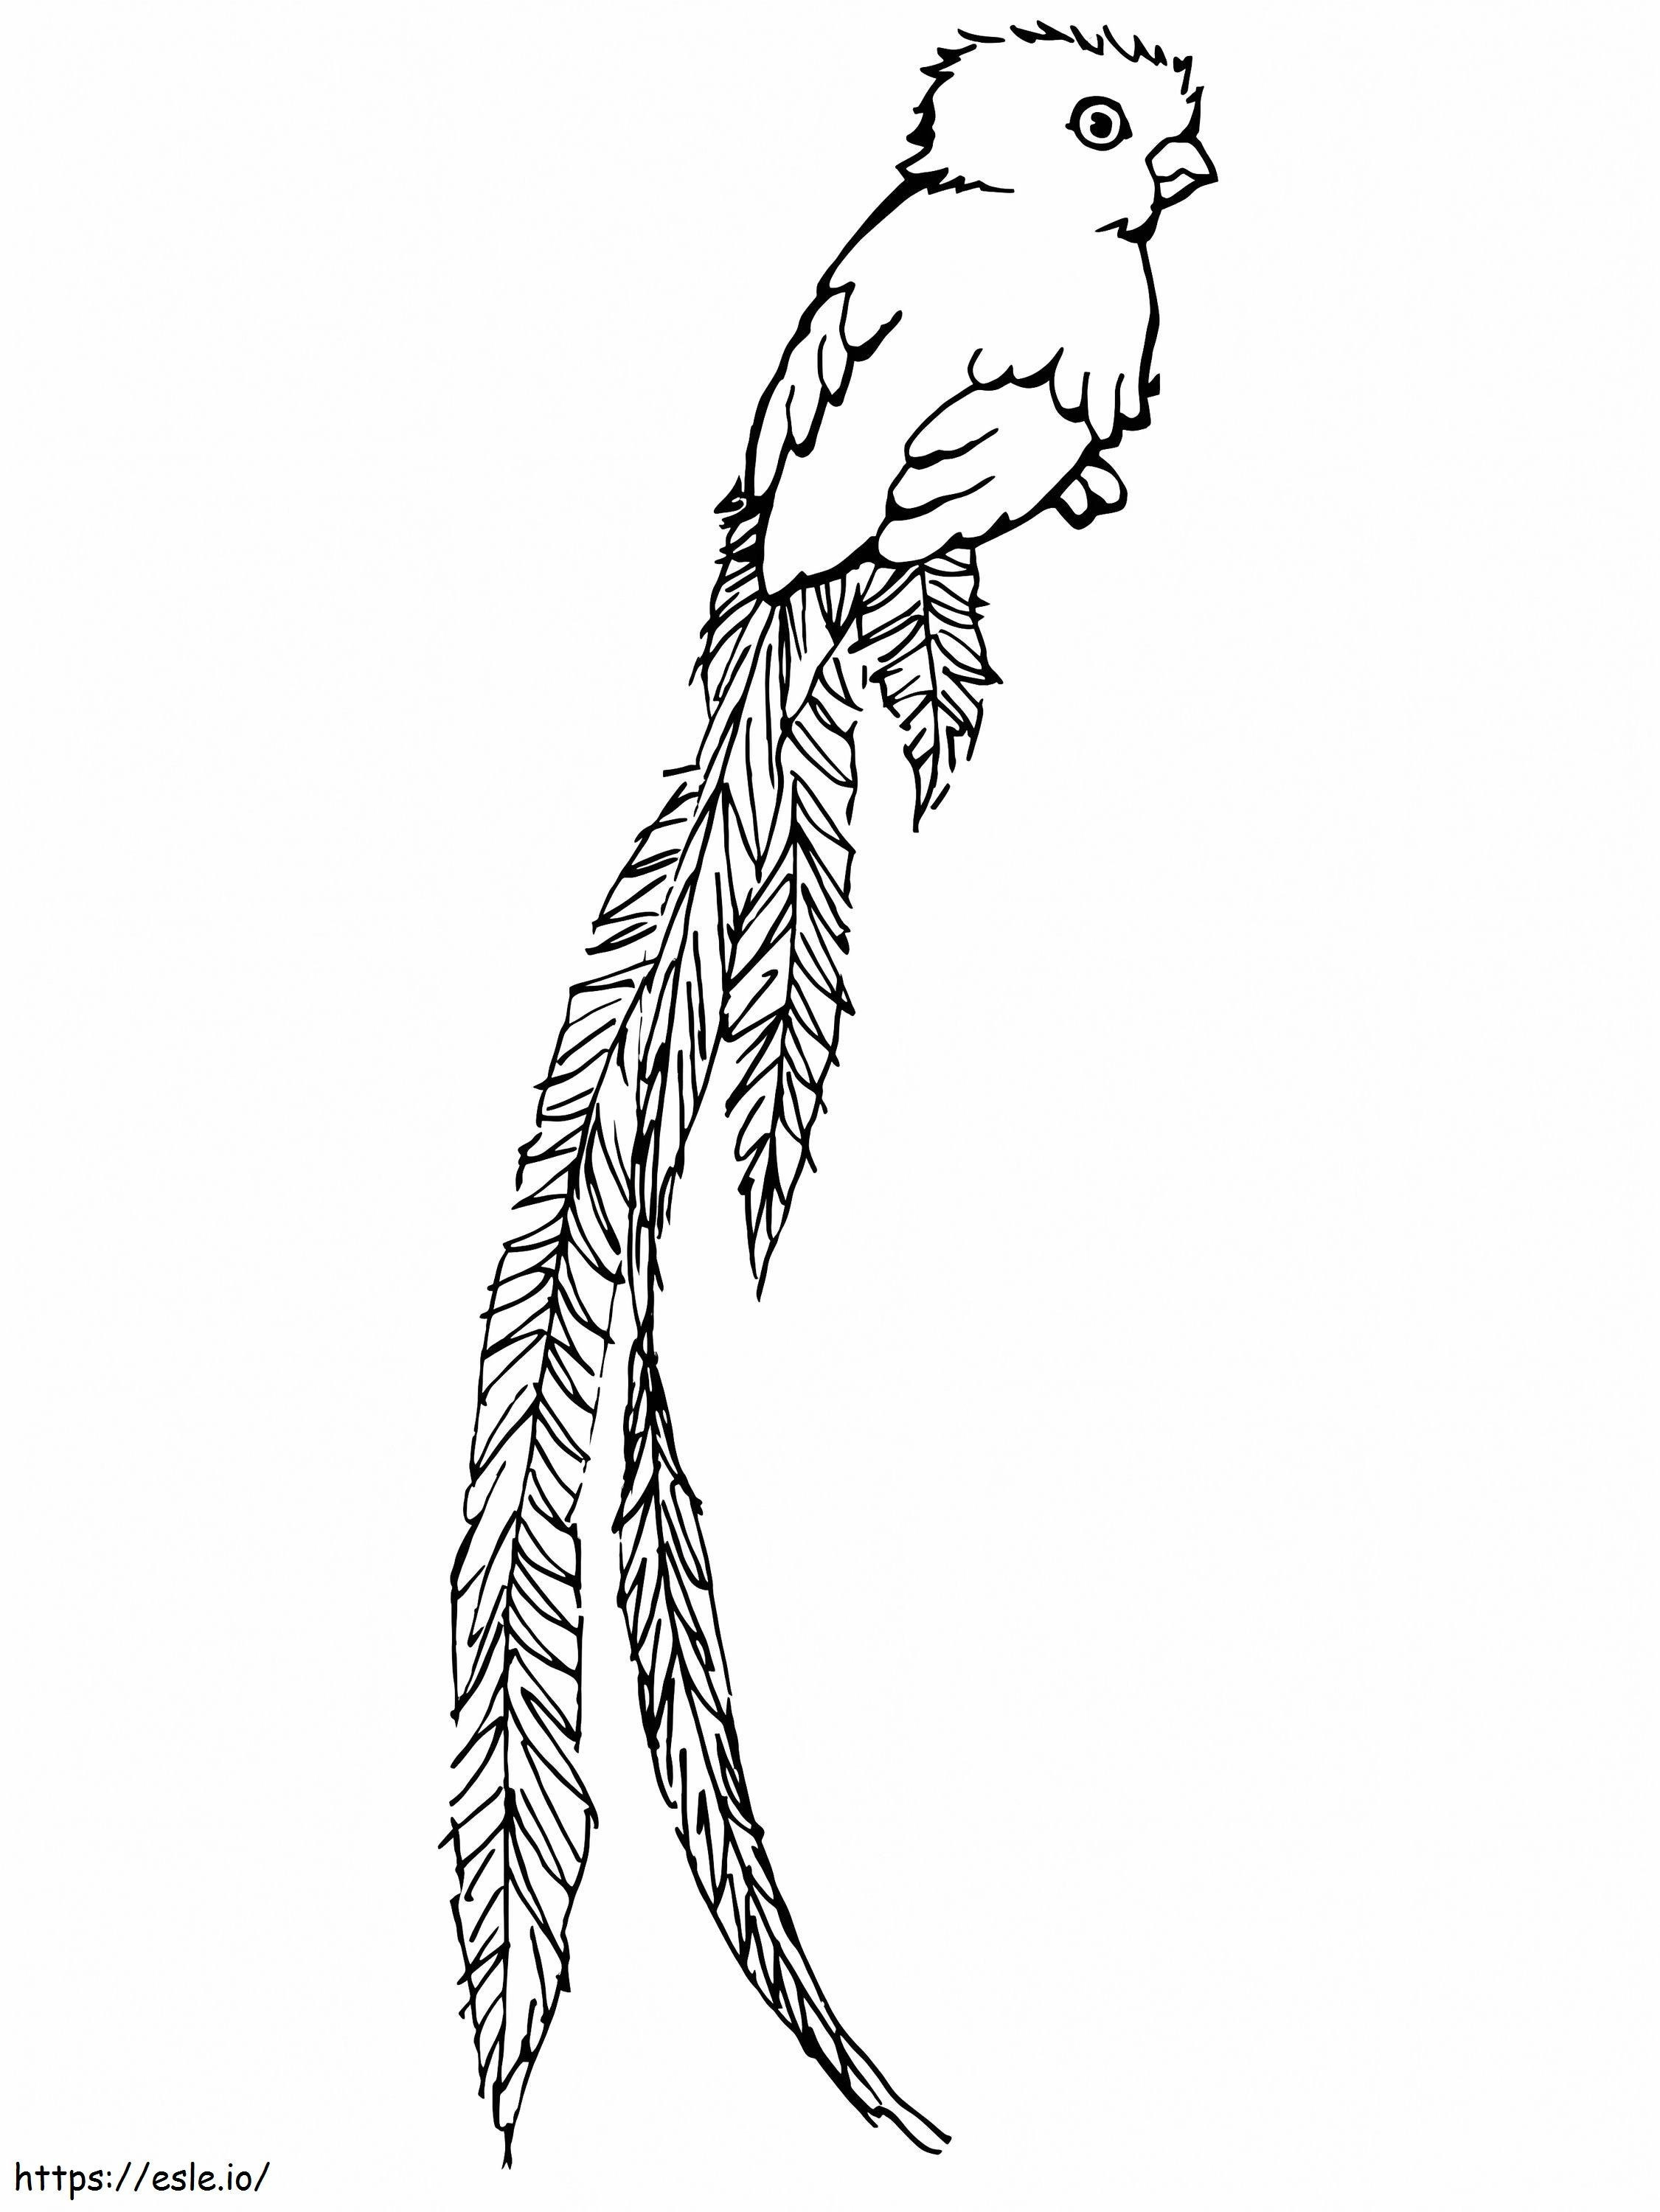 Quetzal Bird Of Paradise coloring page